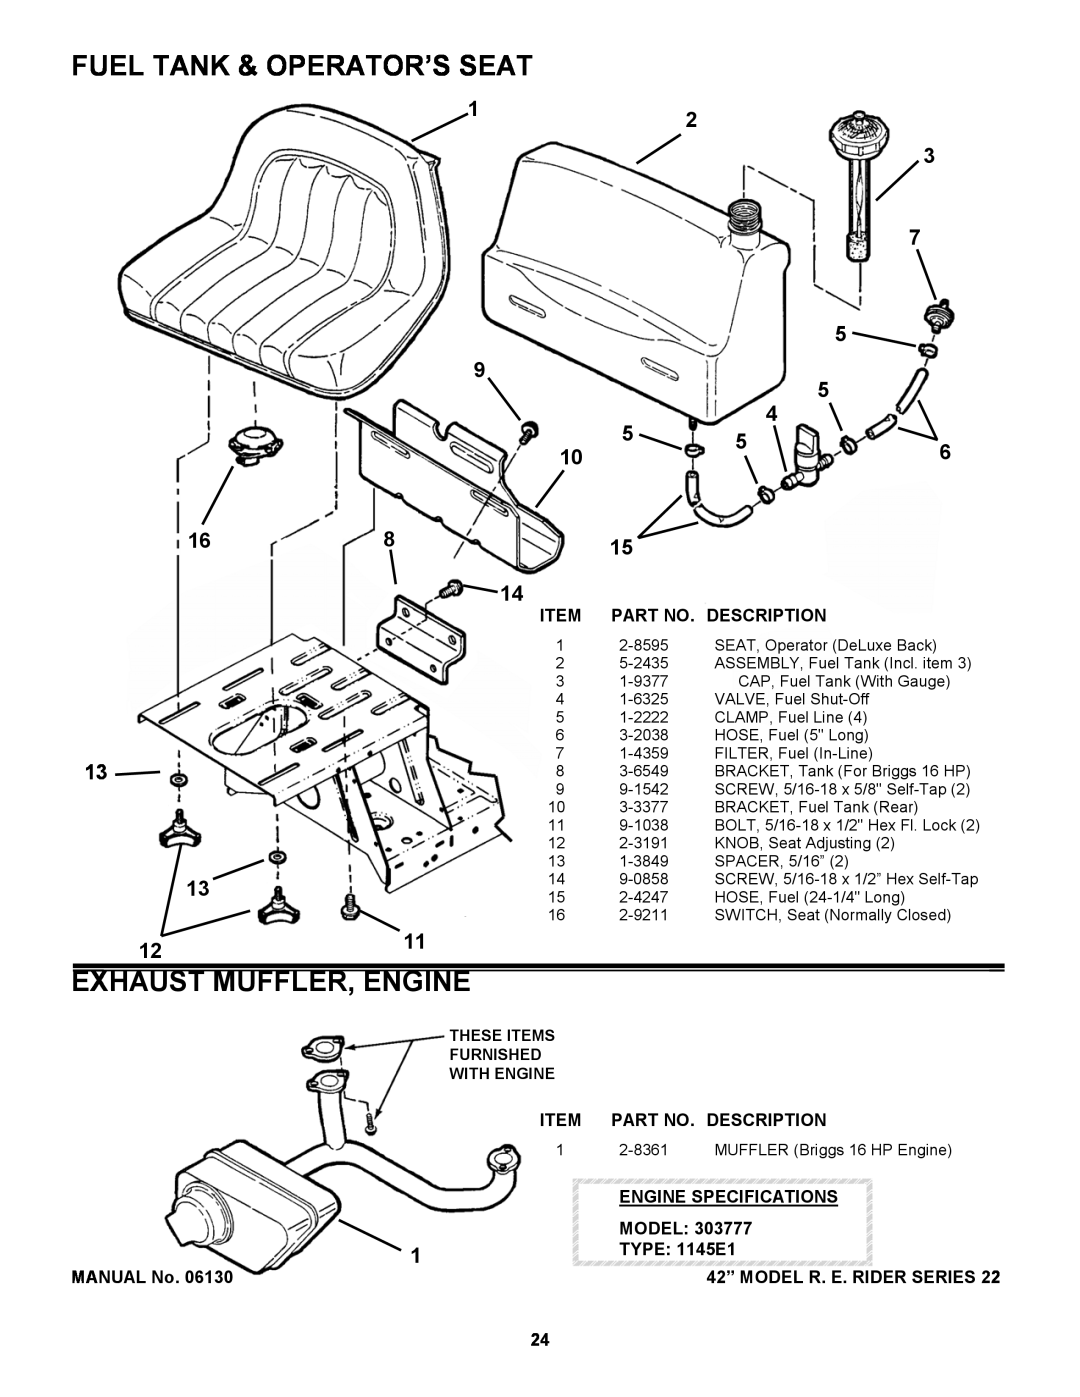 Snapper 421622BVE Fuel Tank & Operator’S Seat, Exhaust Muffler, Engine, 1211, Engine Specifications, Model, TYPE 1145E1 